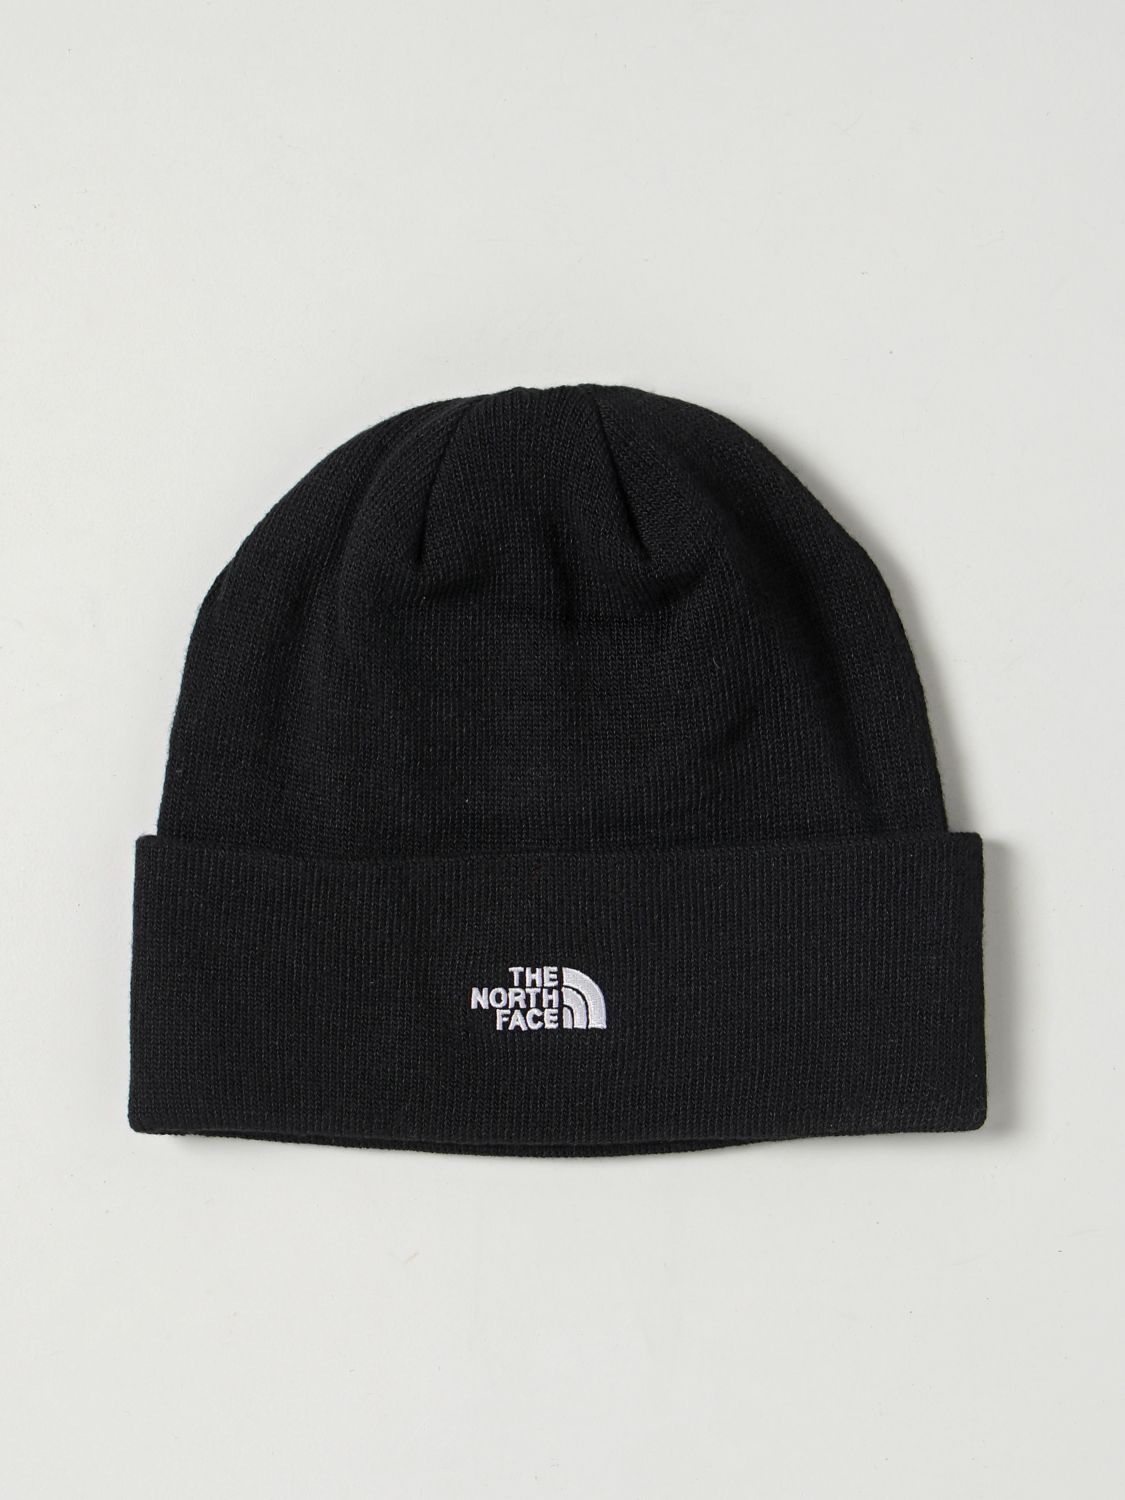 THE NORTH FACE: hat for men - Black | The North Face hat NF0A5FW1 ...